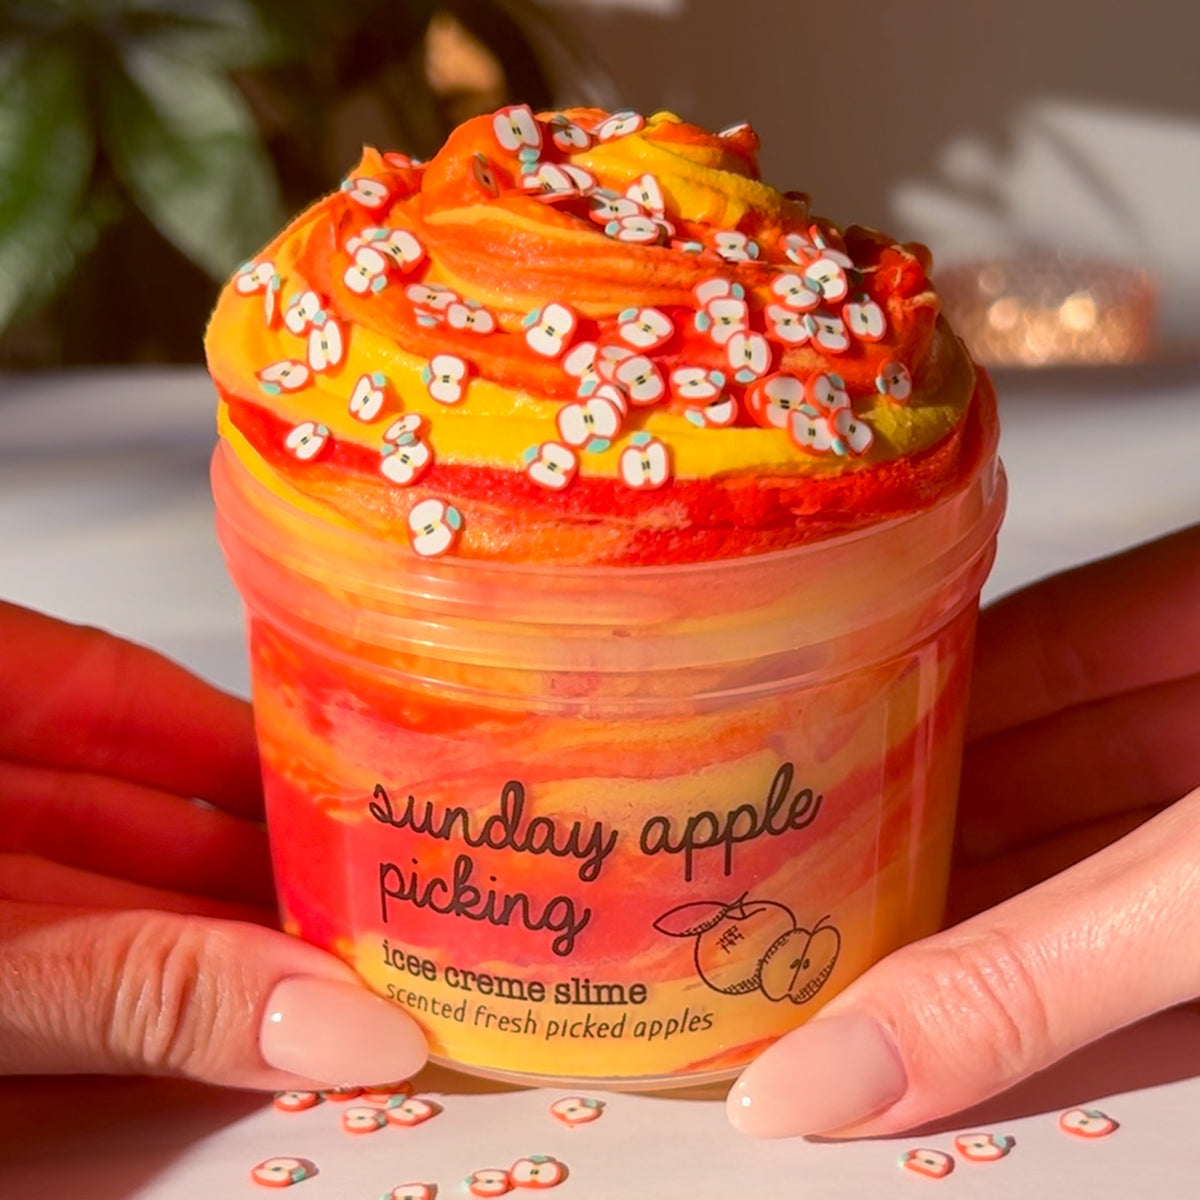 Sunday Apple Picking Fall Slime Apple Cinnamon Scented Slime Fantasies Shop 9oz New Front View 2